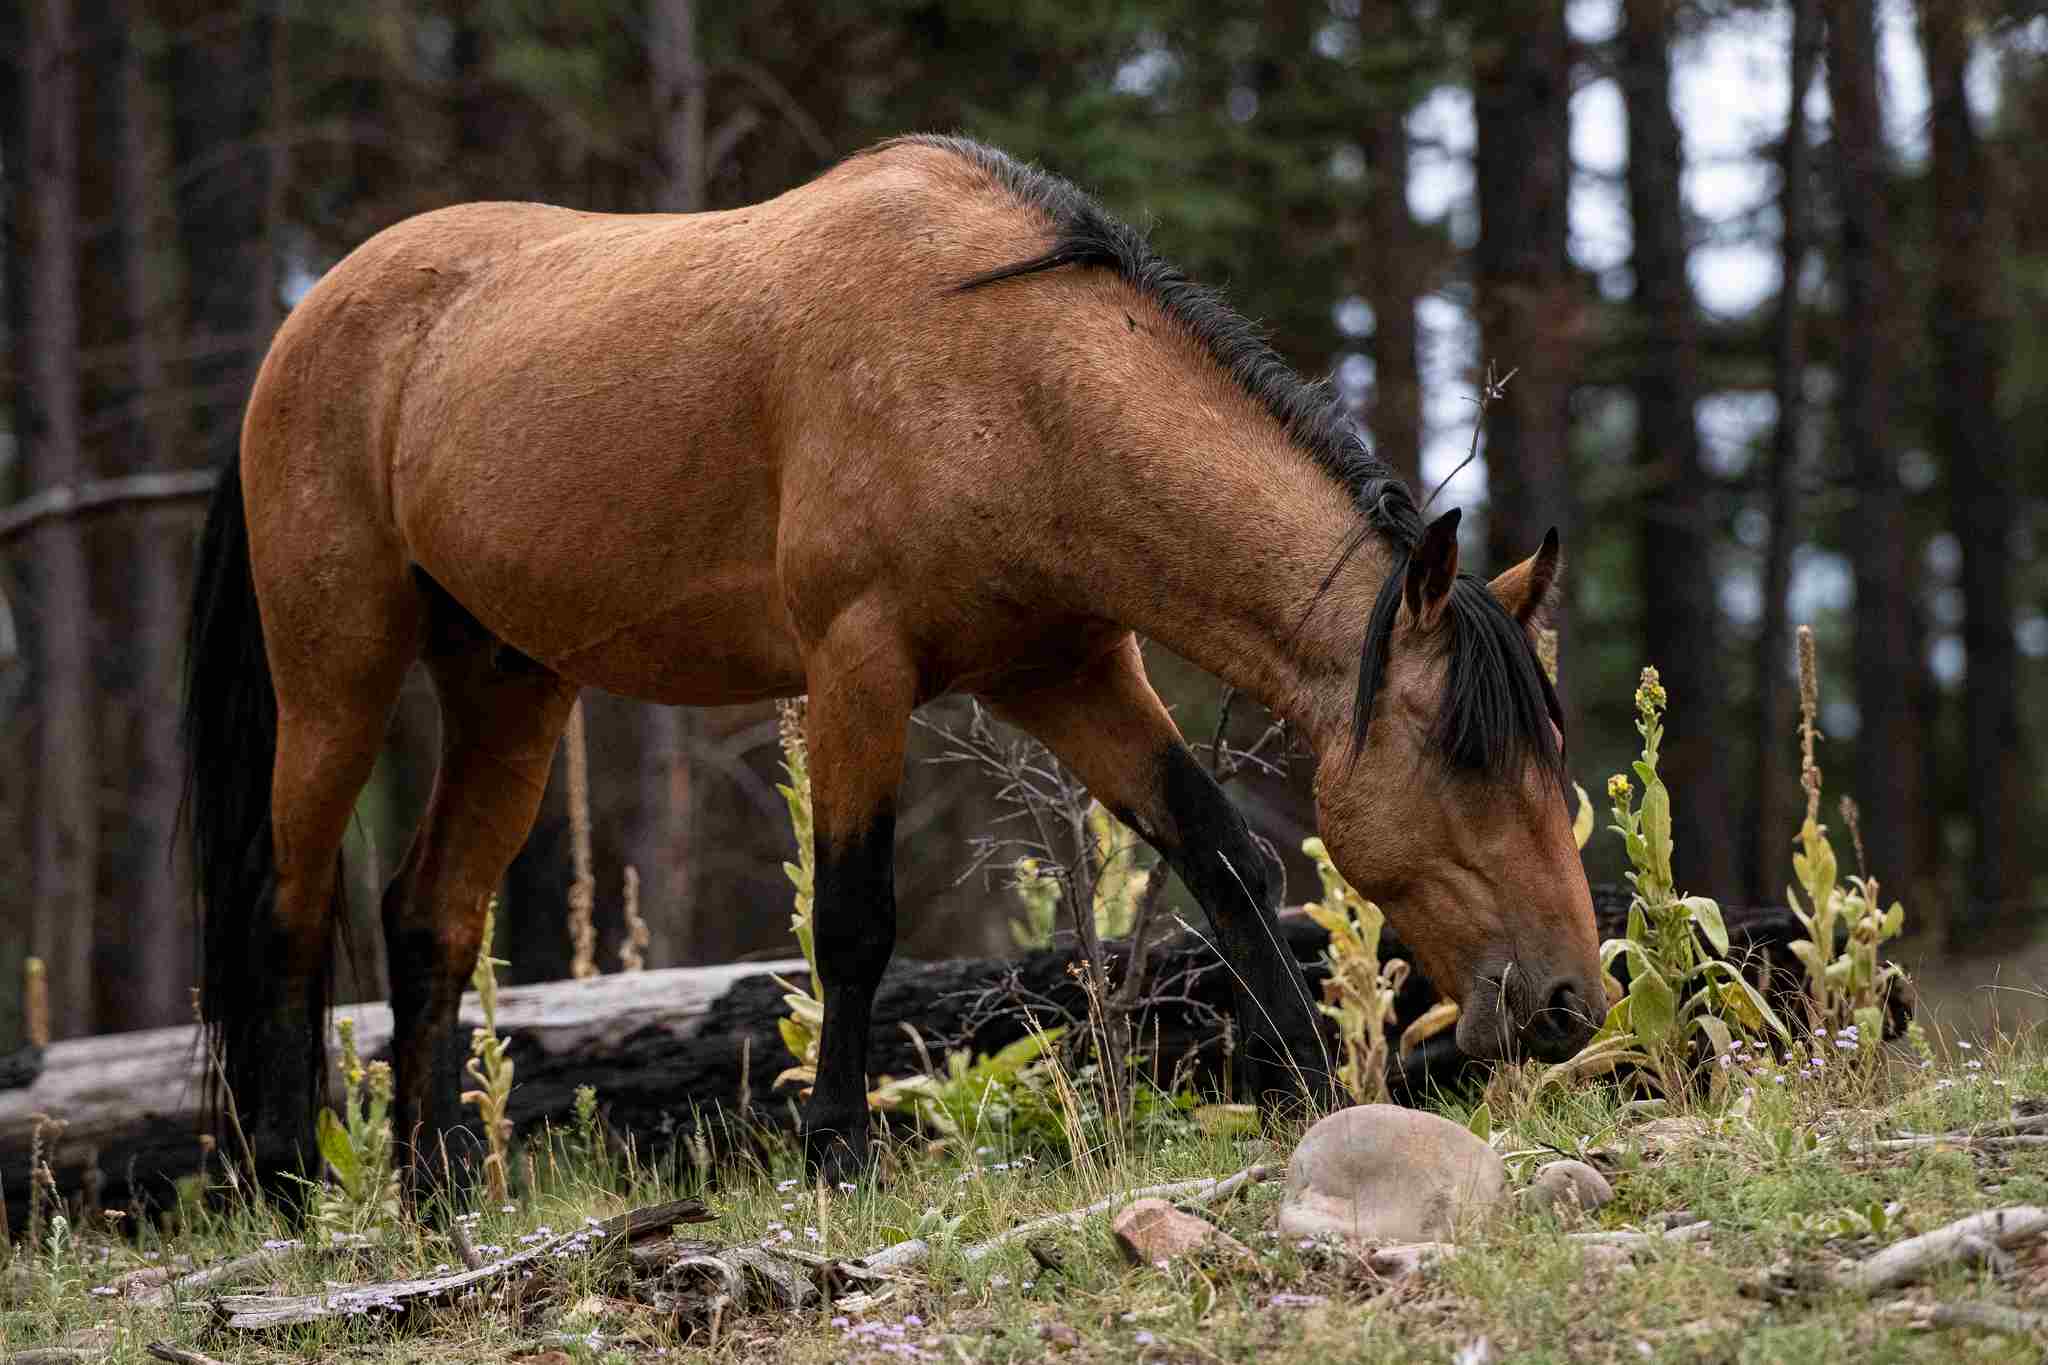 Do Horses Eat Meat: Exclusive Plant Consumption Implies that Horses Do Not Naturally Eat Meat (Credit: U.S. Department of Agriculture 2019, Uploaded Online 2020 .PDM 1.0.)